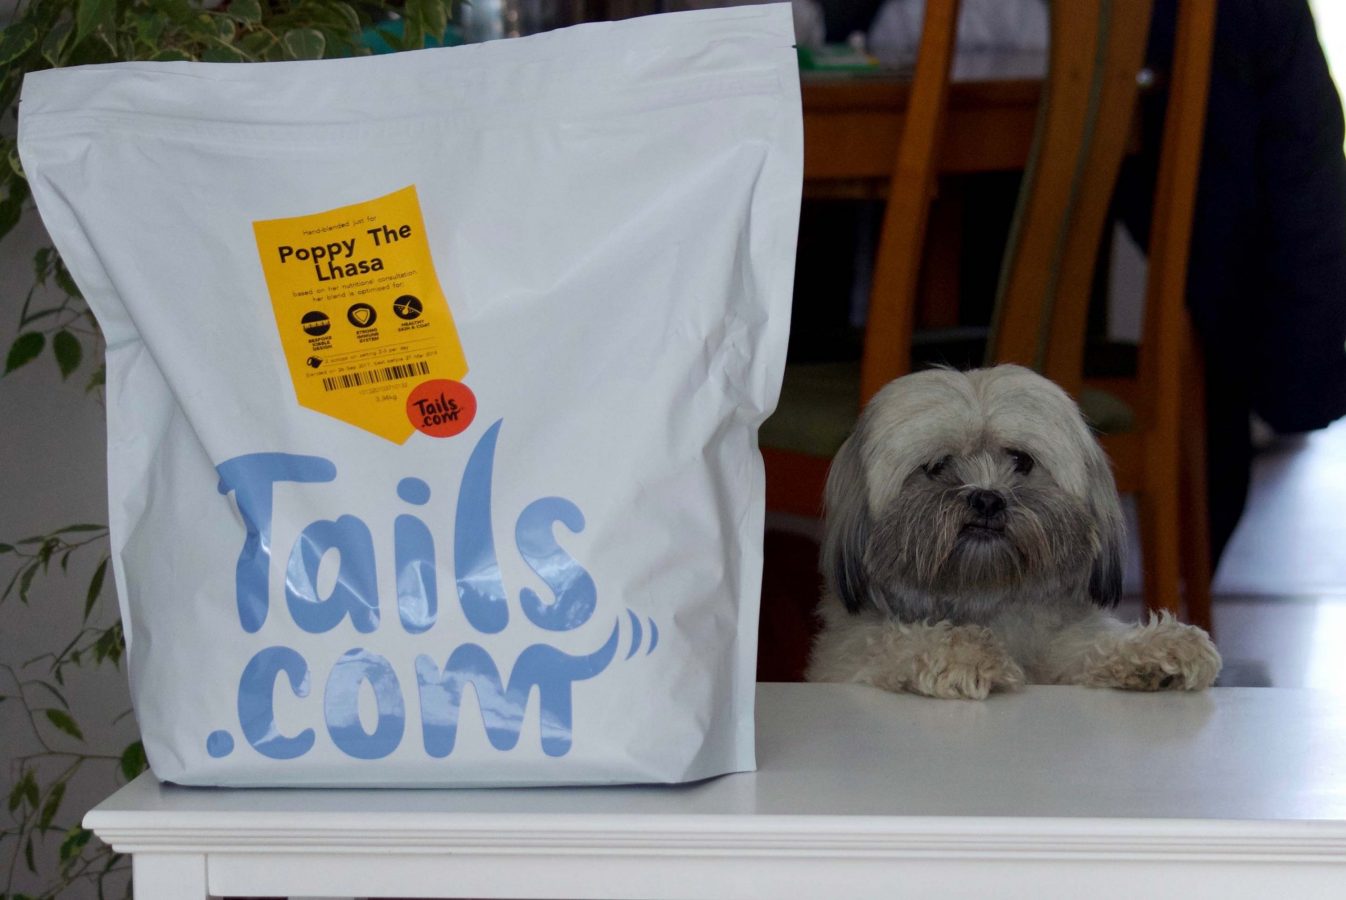 Lhasa Apso with tails.com dog food parcel